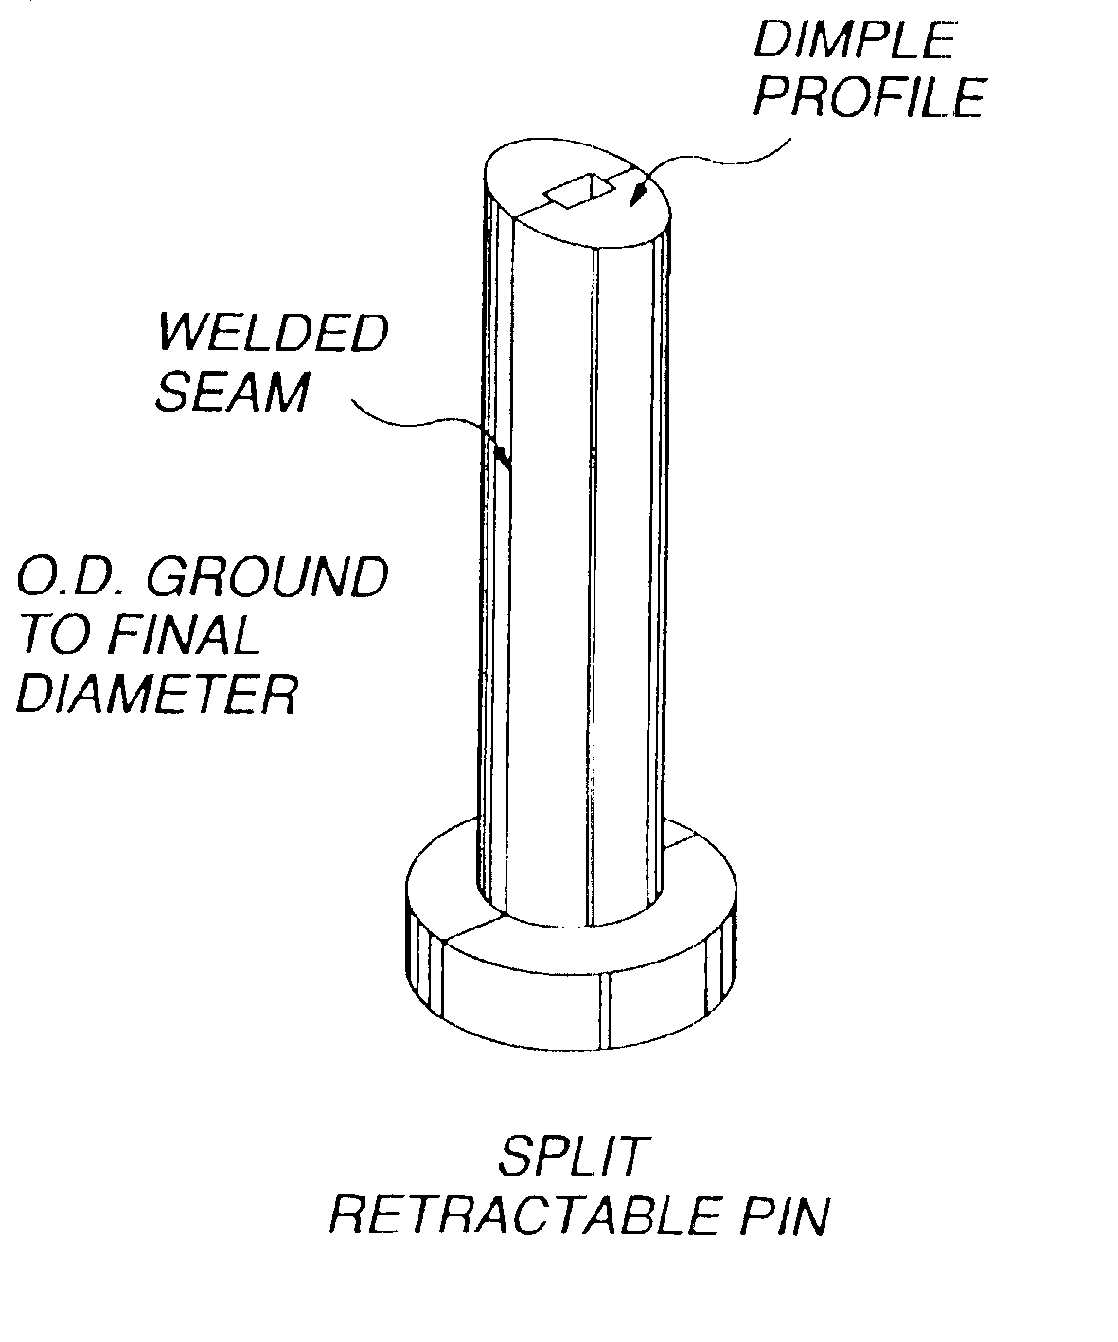 Split vent pin for injection molding